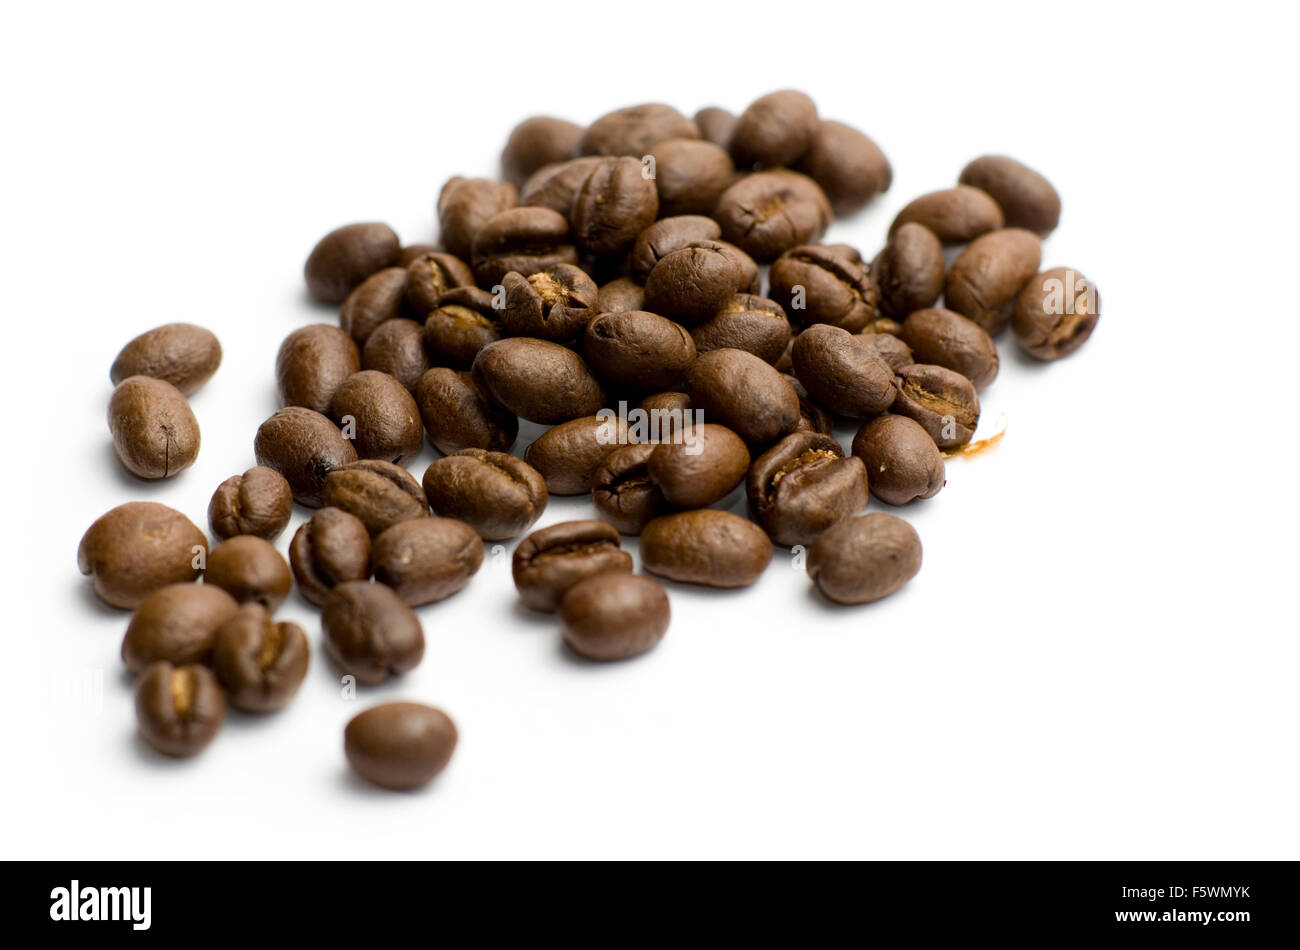 Coffee beans on a white background. Stock Photo